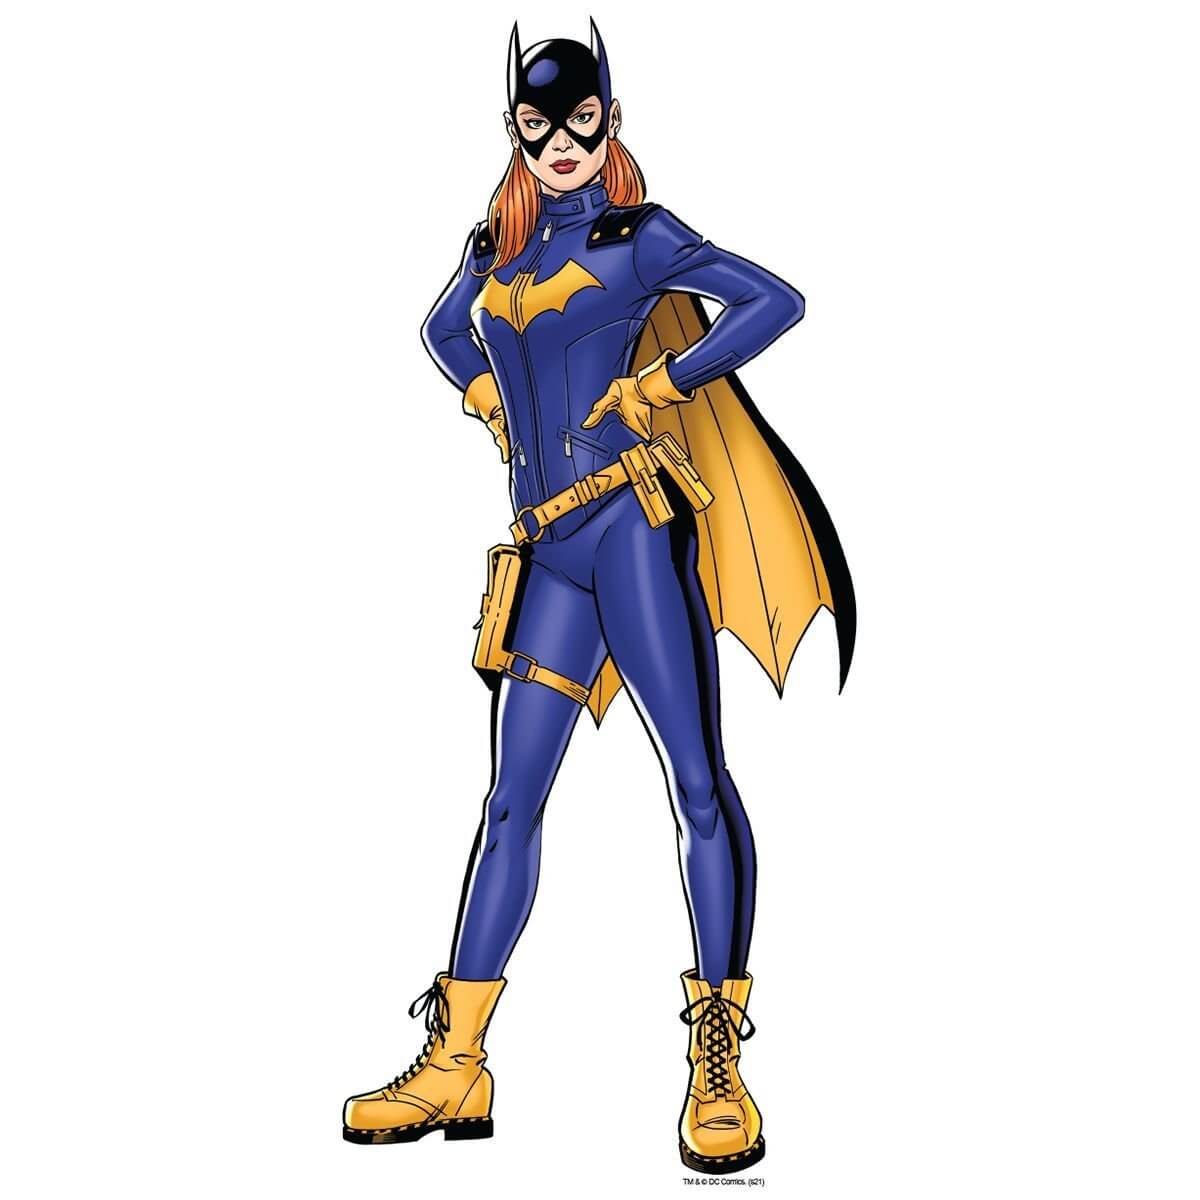 Kismet Decals Batgirl Akimbo Stance Licensed Wall Sticker - Easy DIY Justice League Home & Room Decor Wall Art - Kismet Decals